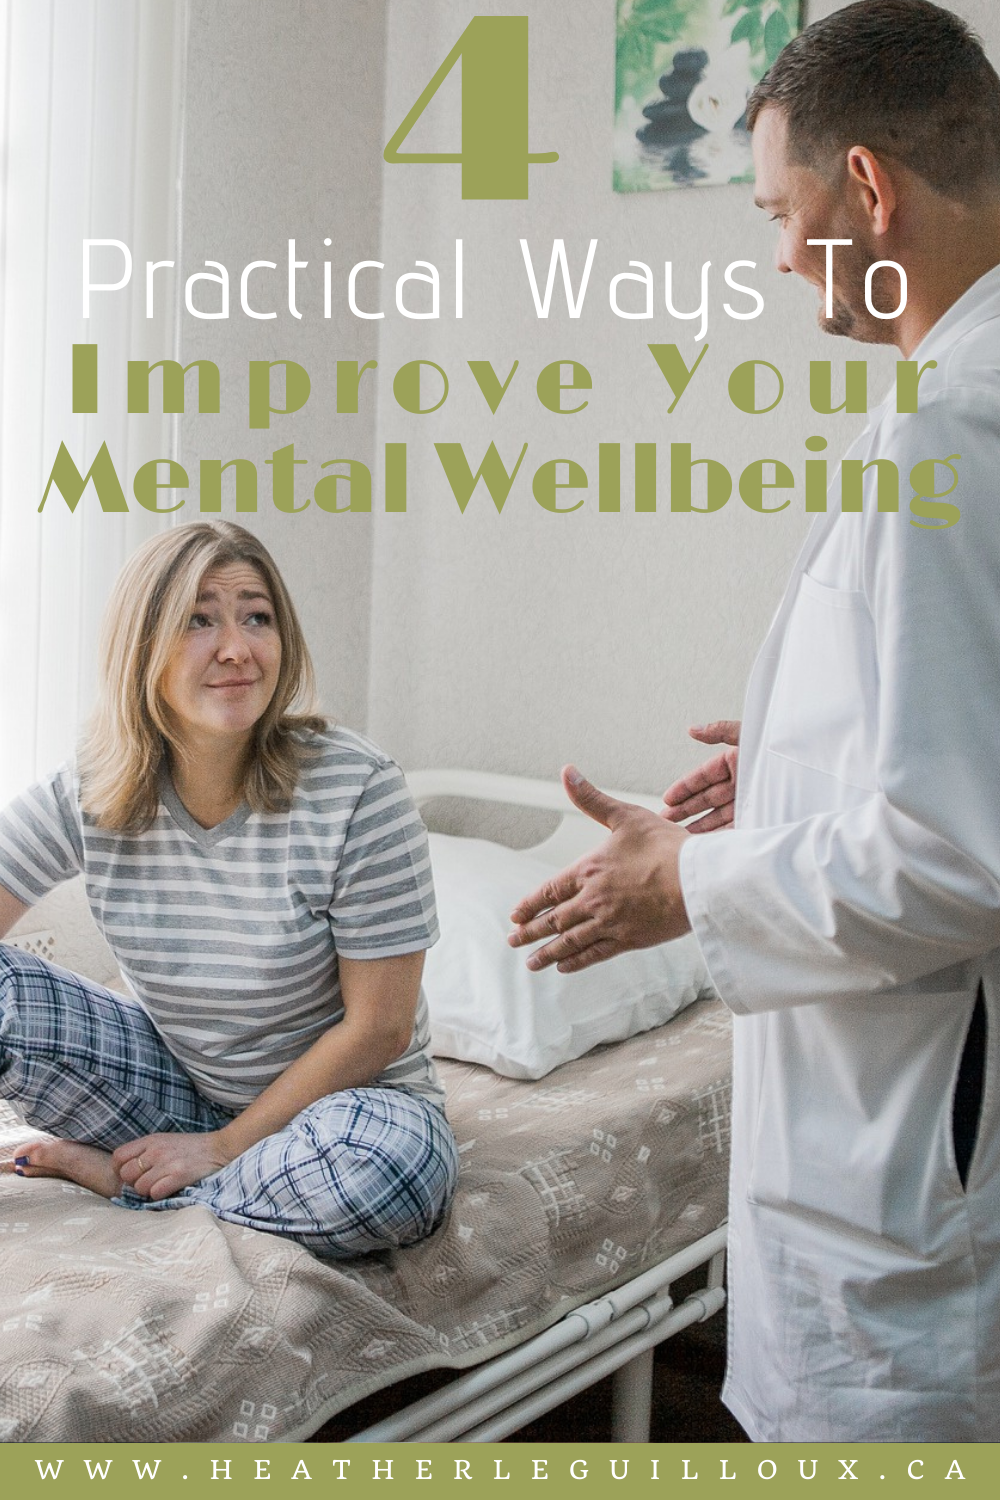 Your mental and physical energy are closely connected. To get the most out of your life, you will have to first take good care of yourself mentally, physically and emotionally. Fortunately, enhancing your mental health doesn't have to cost you a dime. Here are a few strategies to help you out. #mentalwellbeing #health #wellness